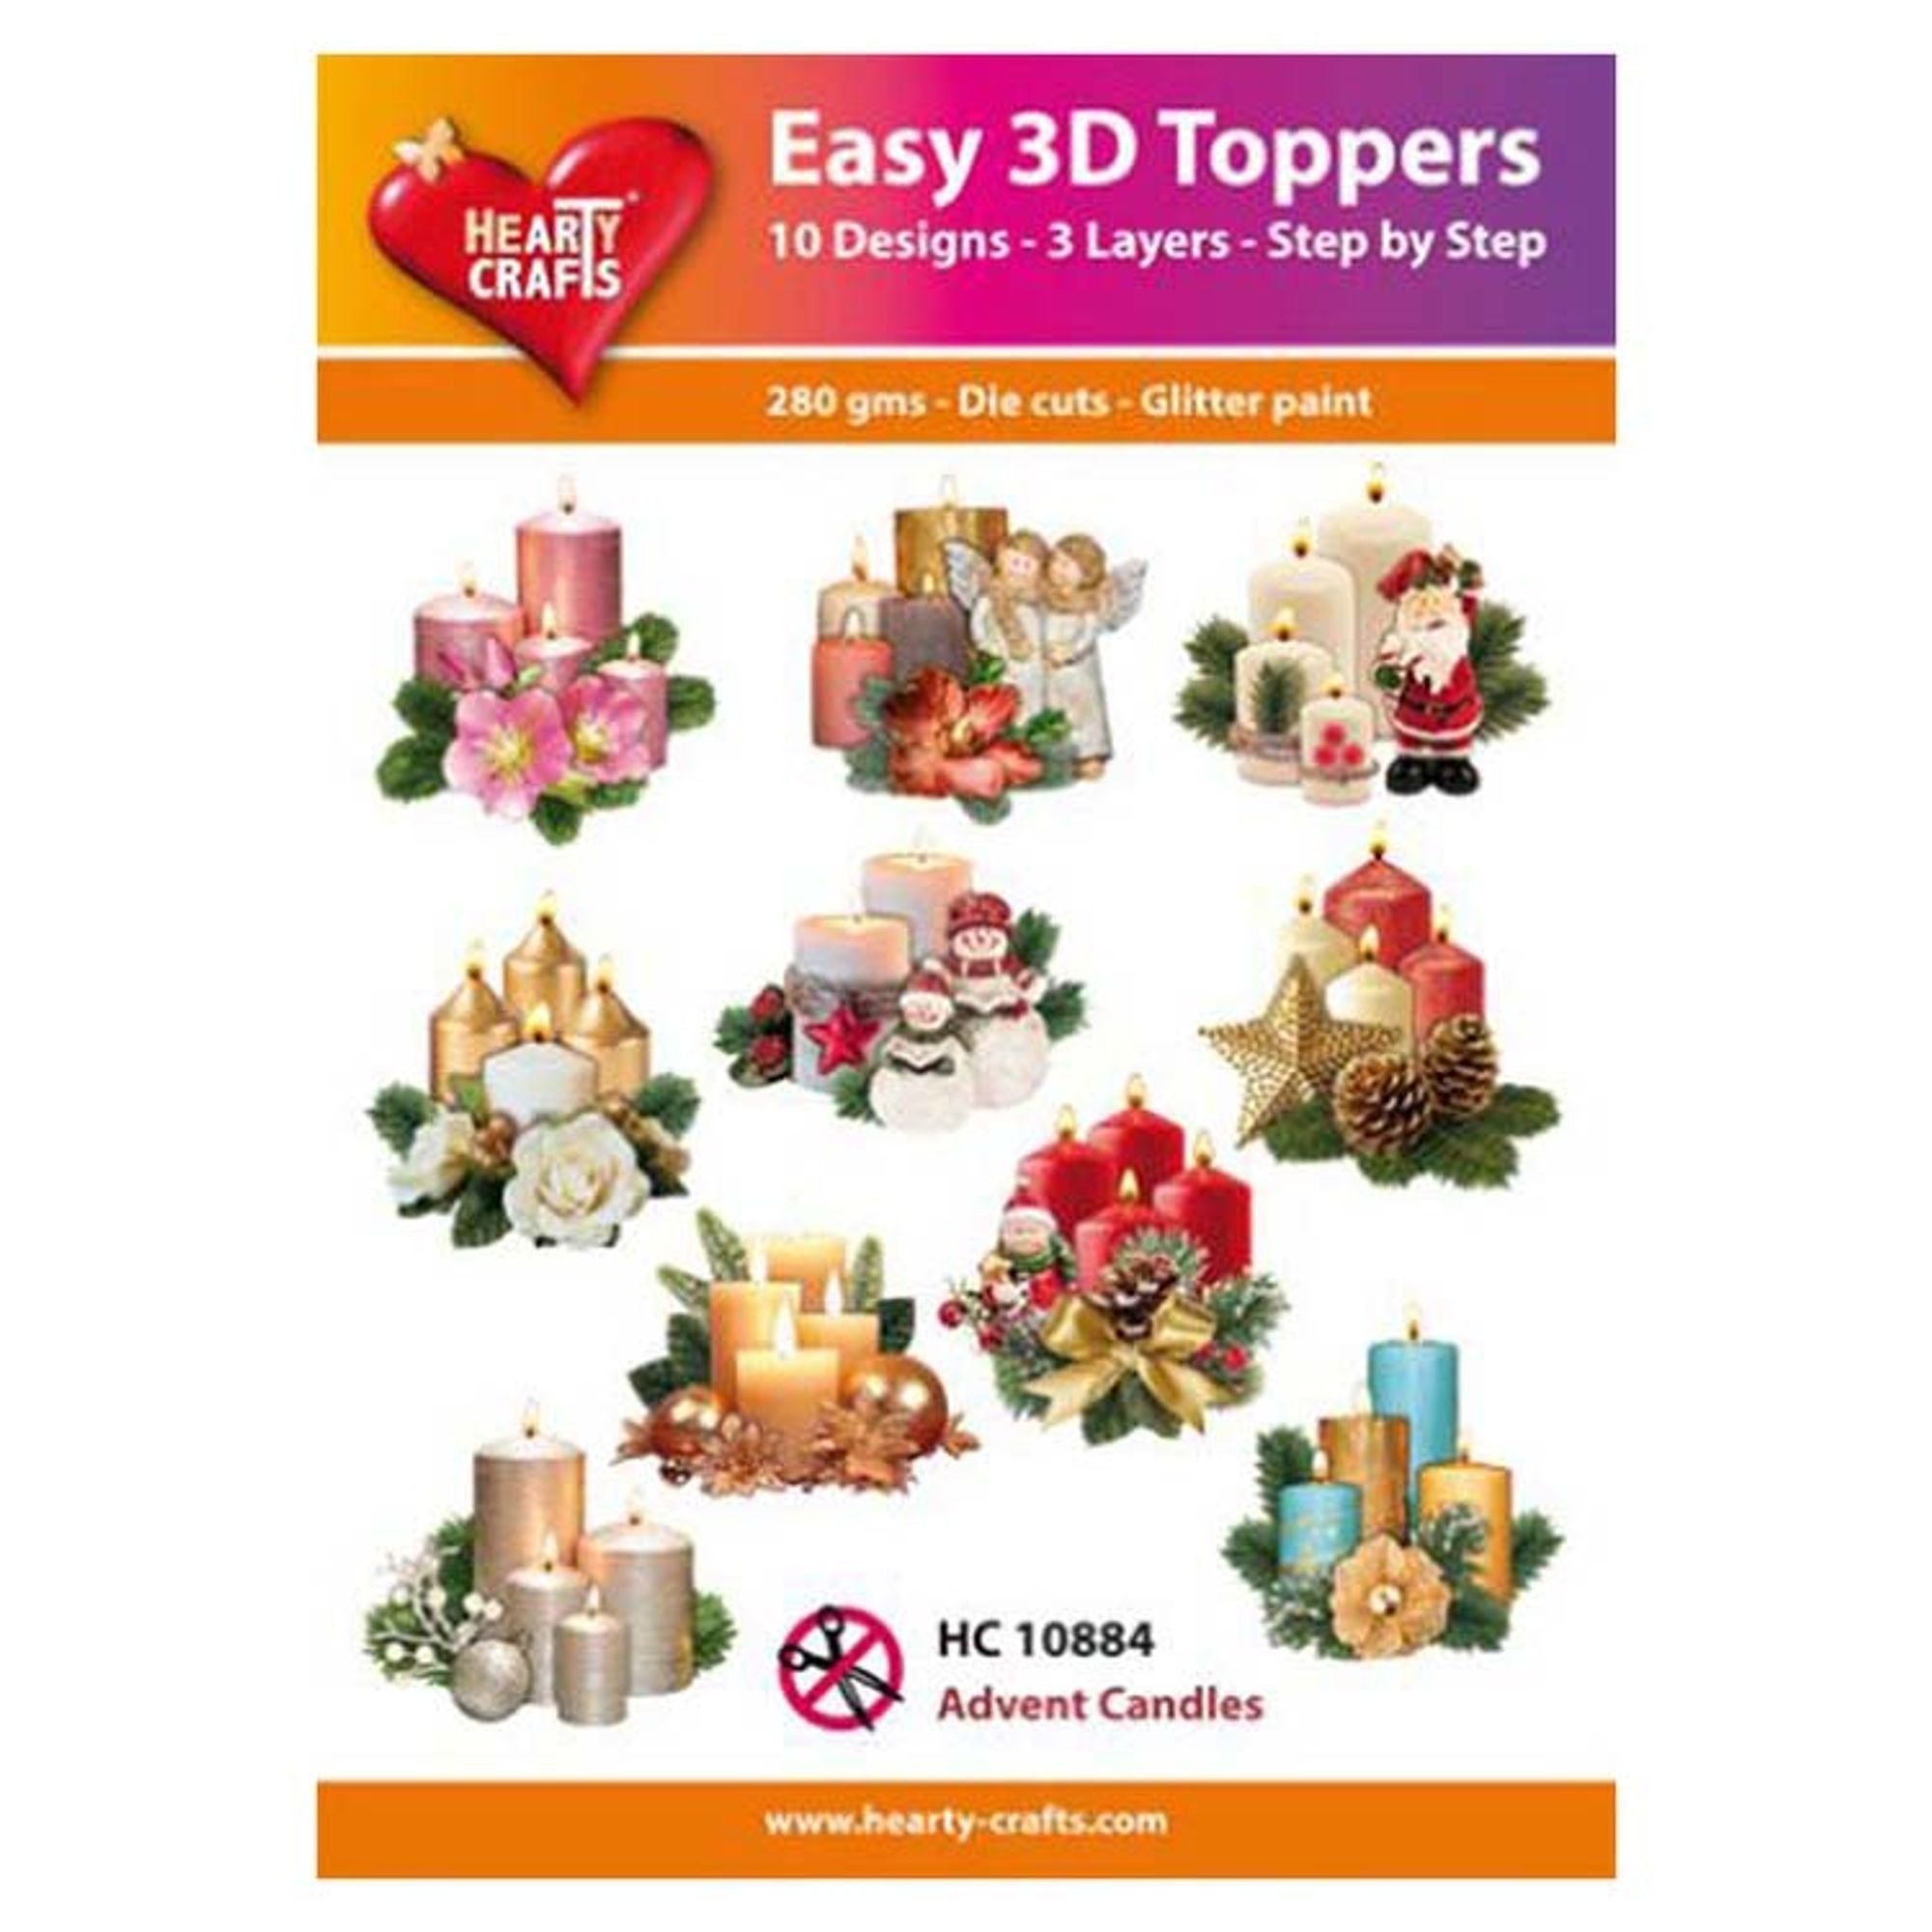 Hearty Crafts Easy 3D Toppers Advent Candles